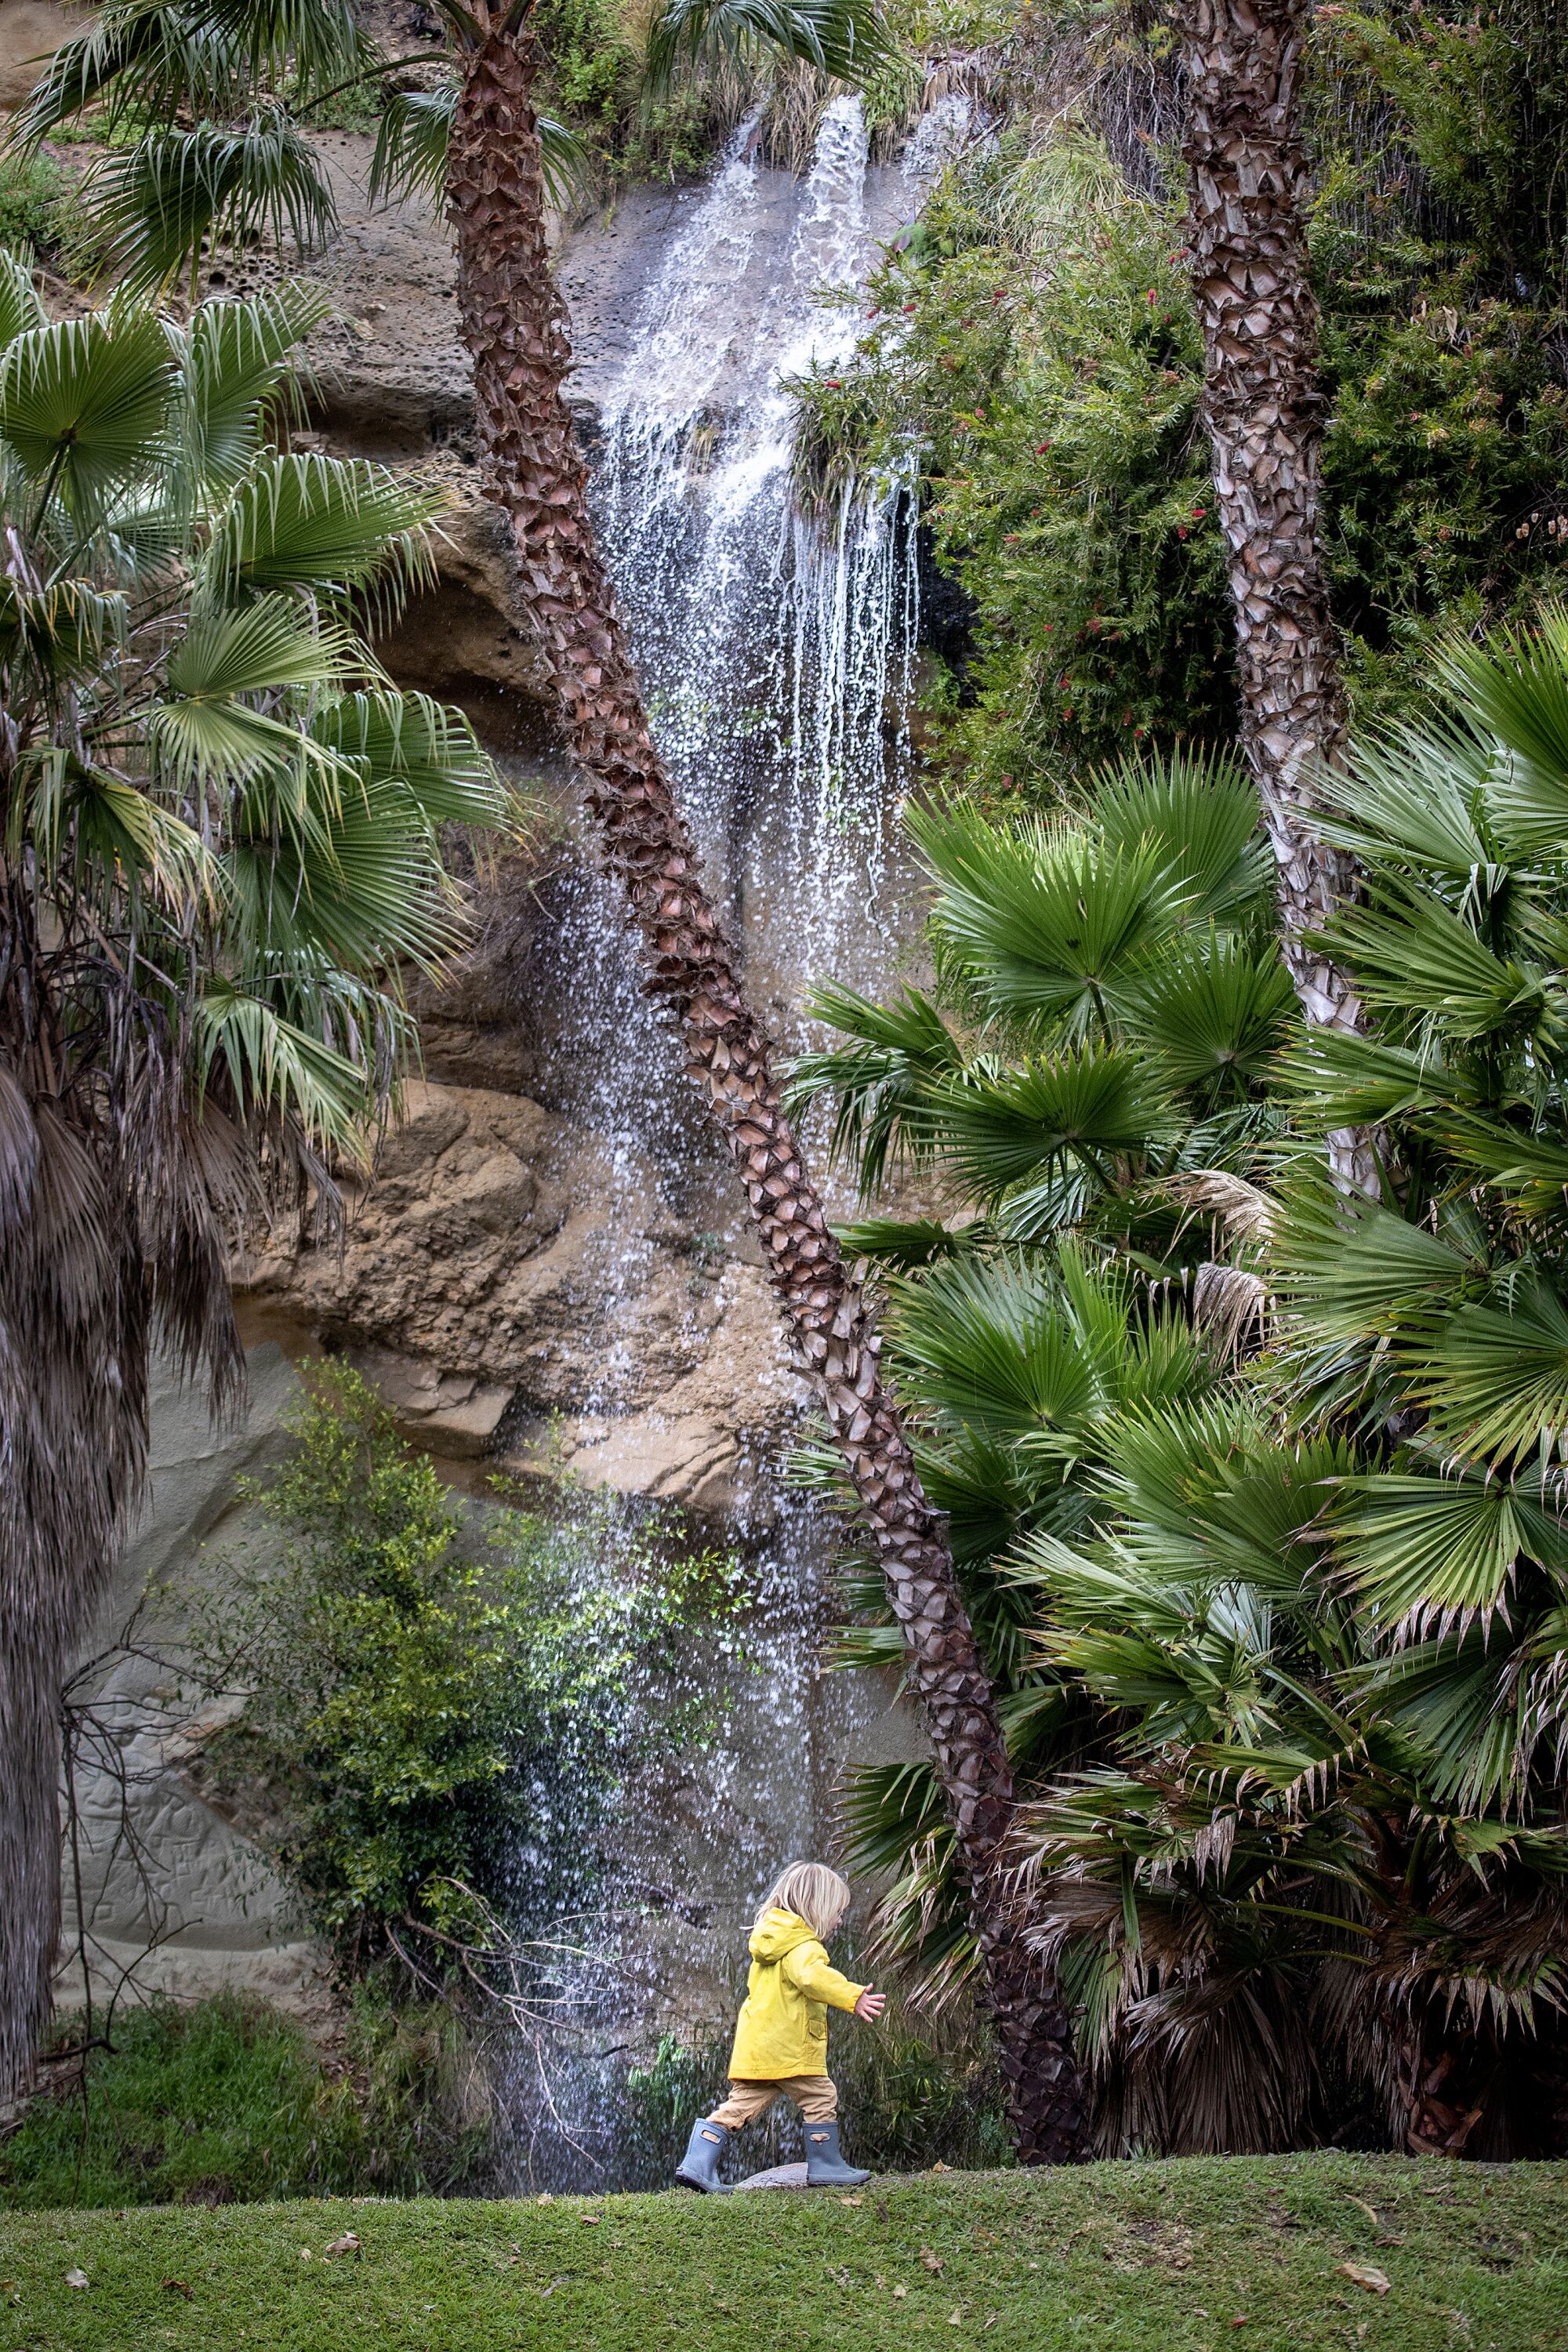 A toddler in a yellow raincoat runs near a small waterfall and palm trees. 